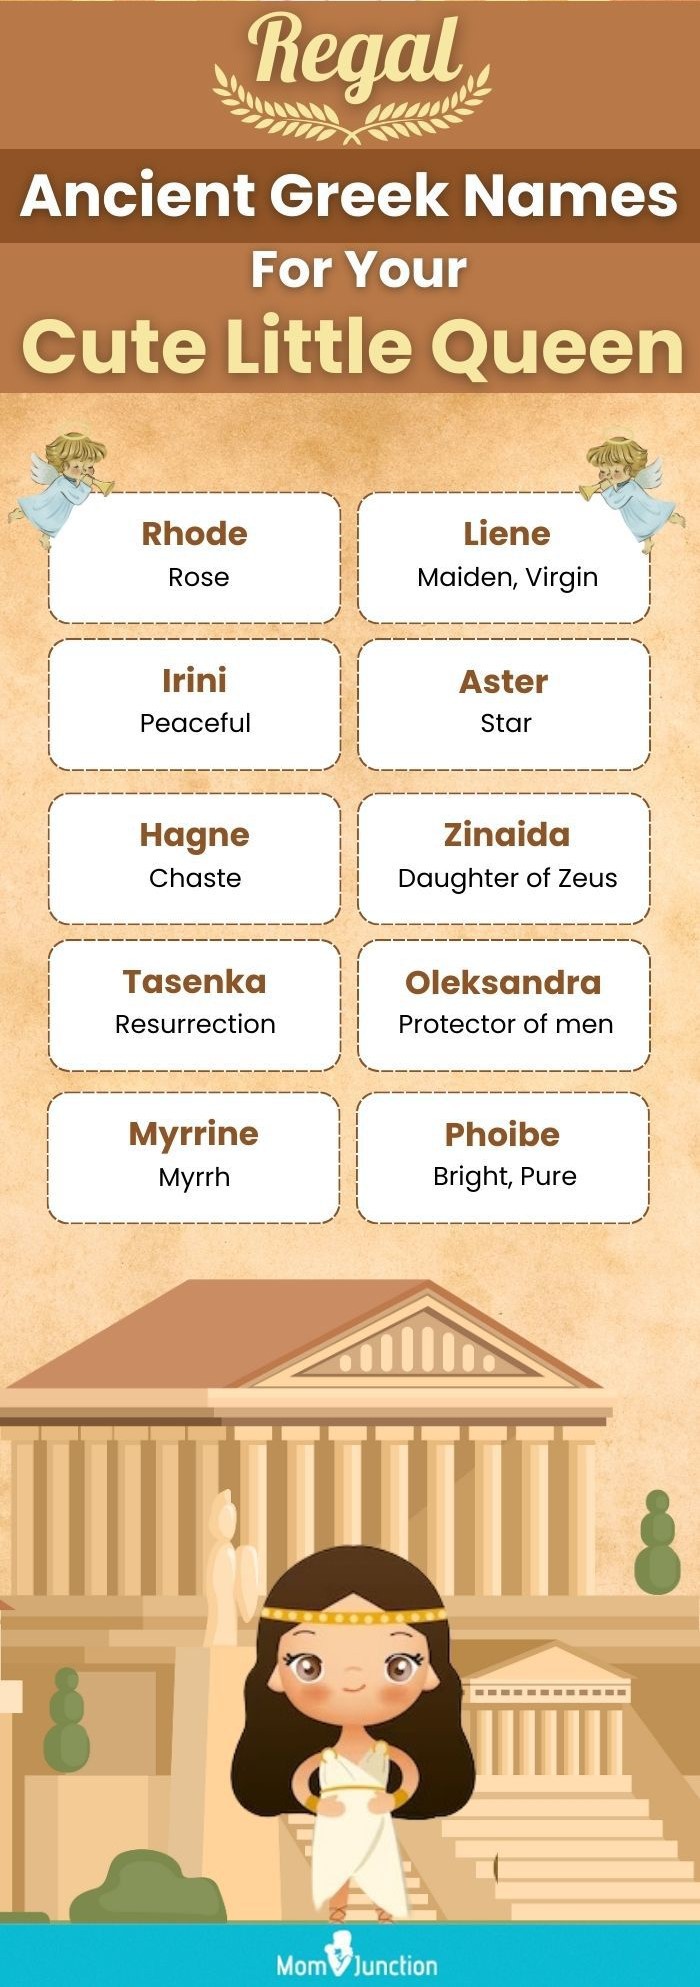 regal ancient greek names for your cute little queen (infographic)